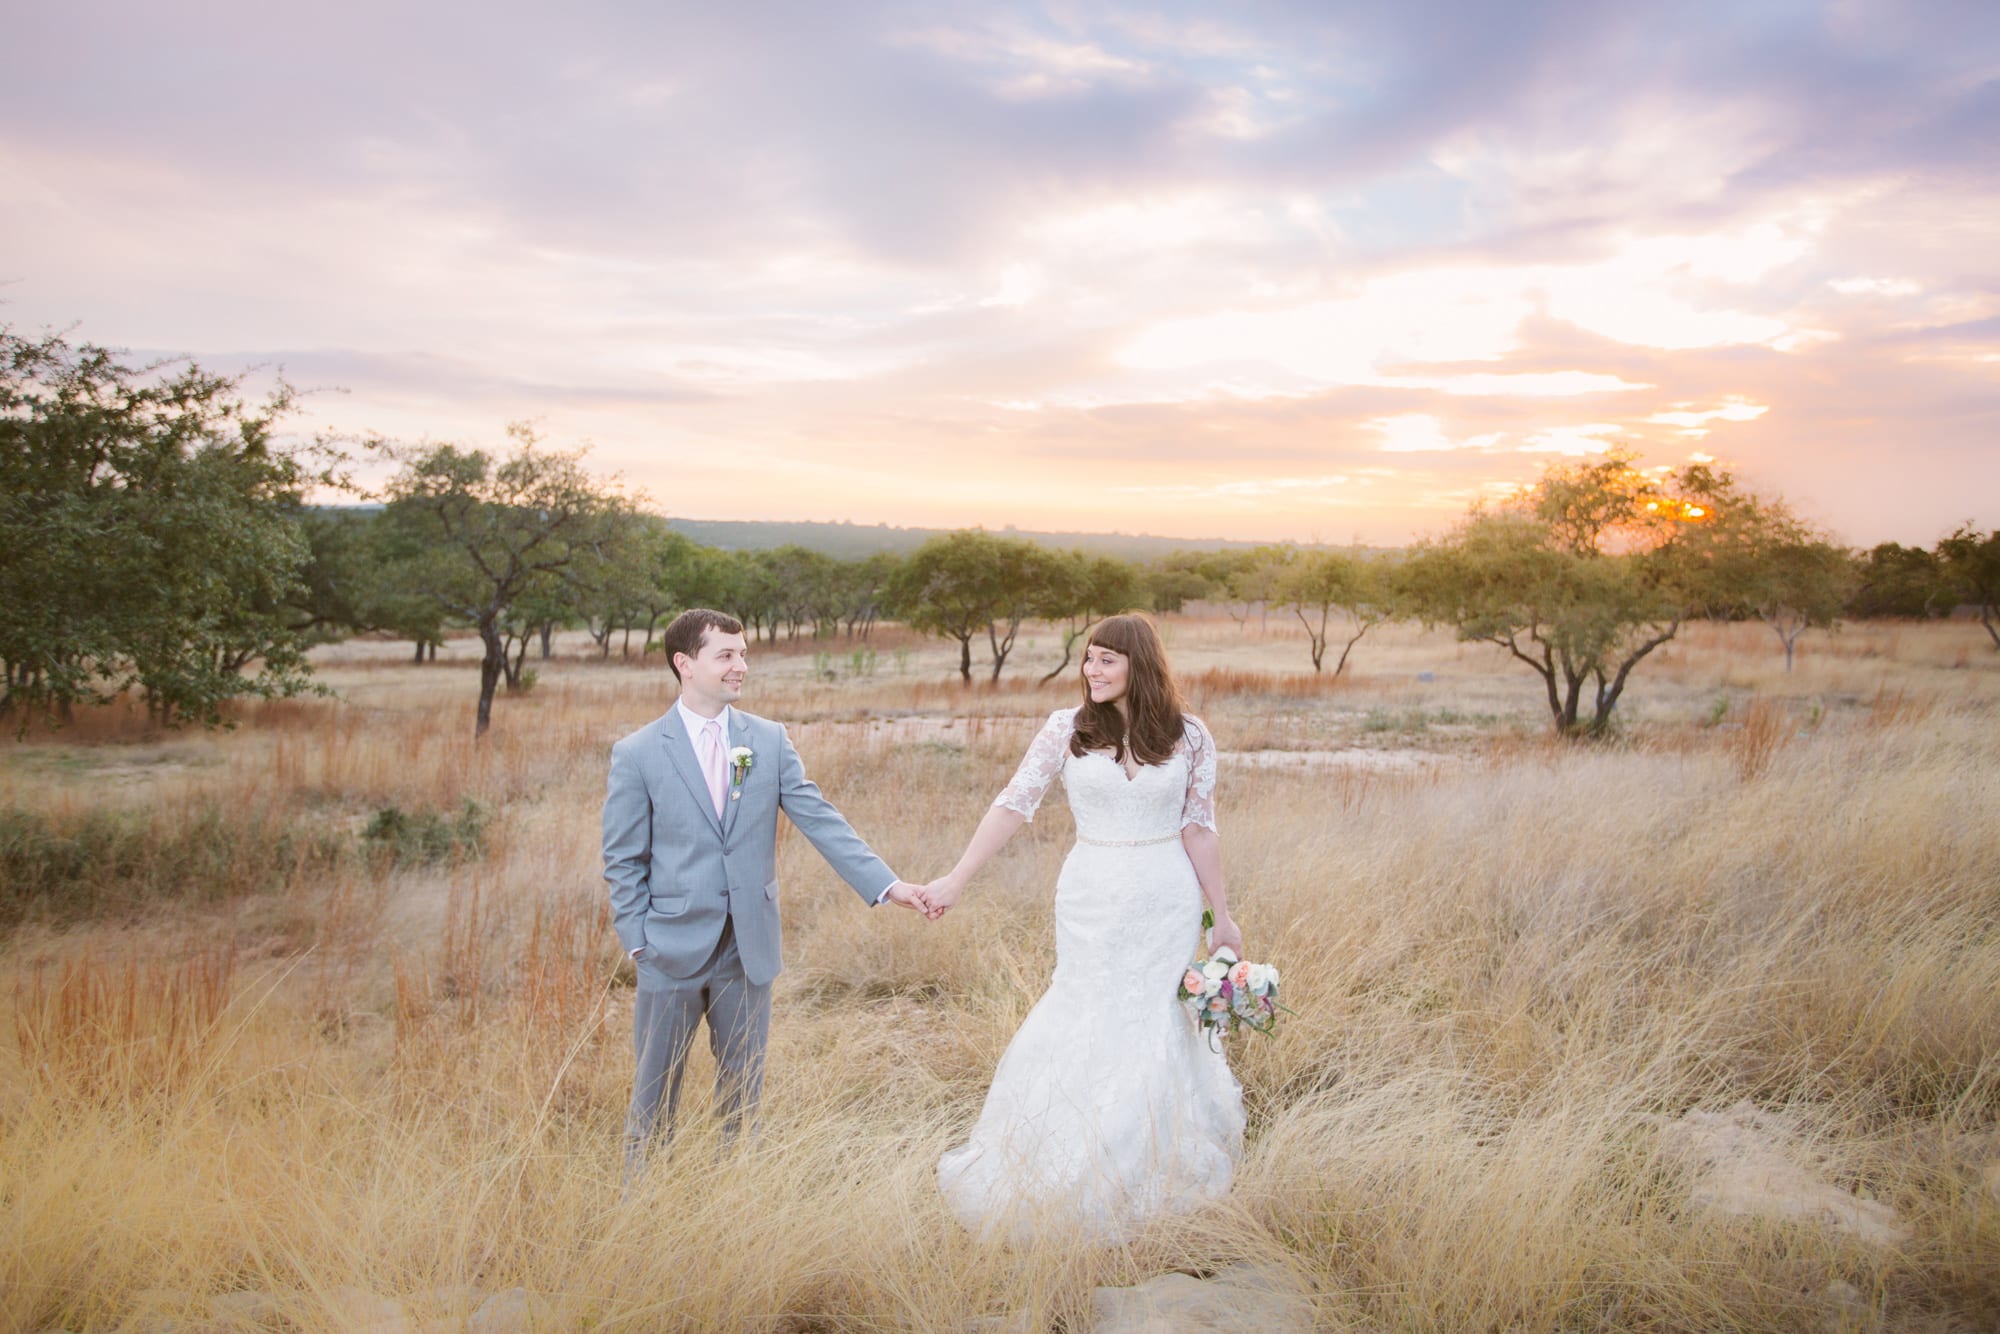 A bride and groom stand in field holding hands while photographers capture the romance